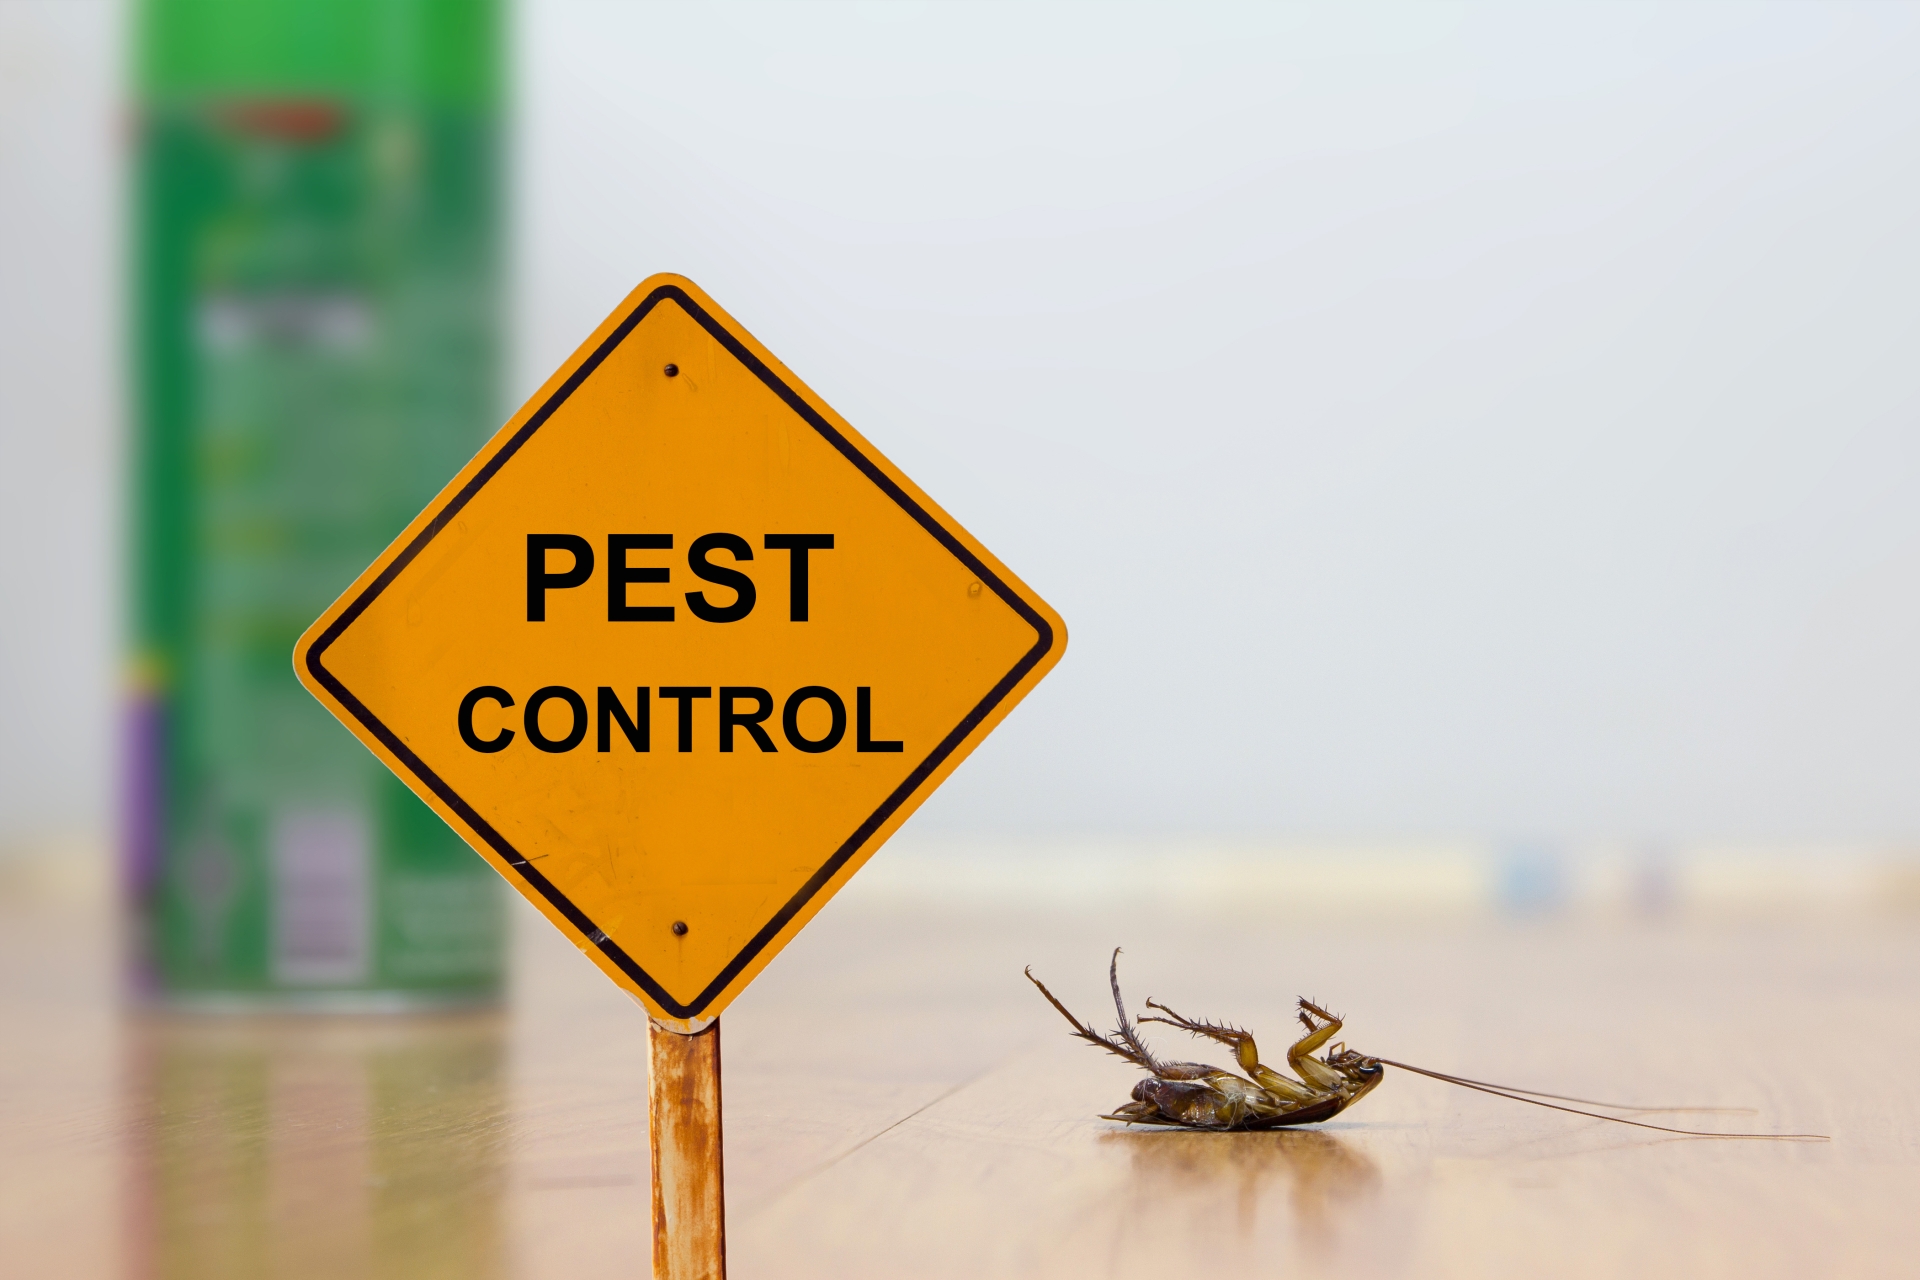 24 Hour Pest Control, Pest Control in Loughton, High Beach, IG10. Call Now 020 8166 9746